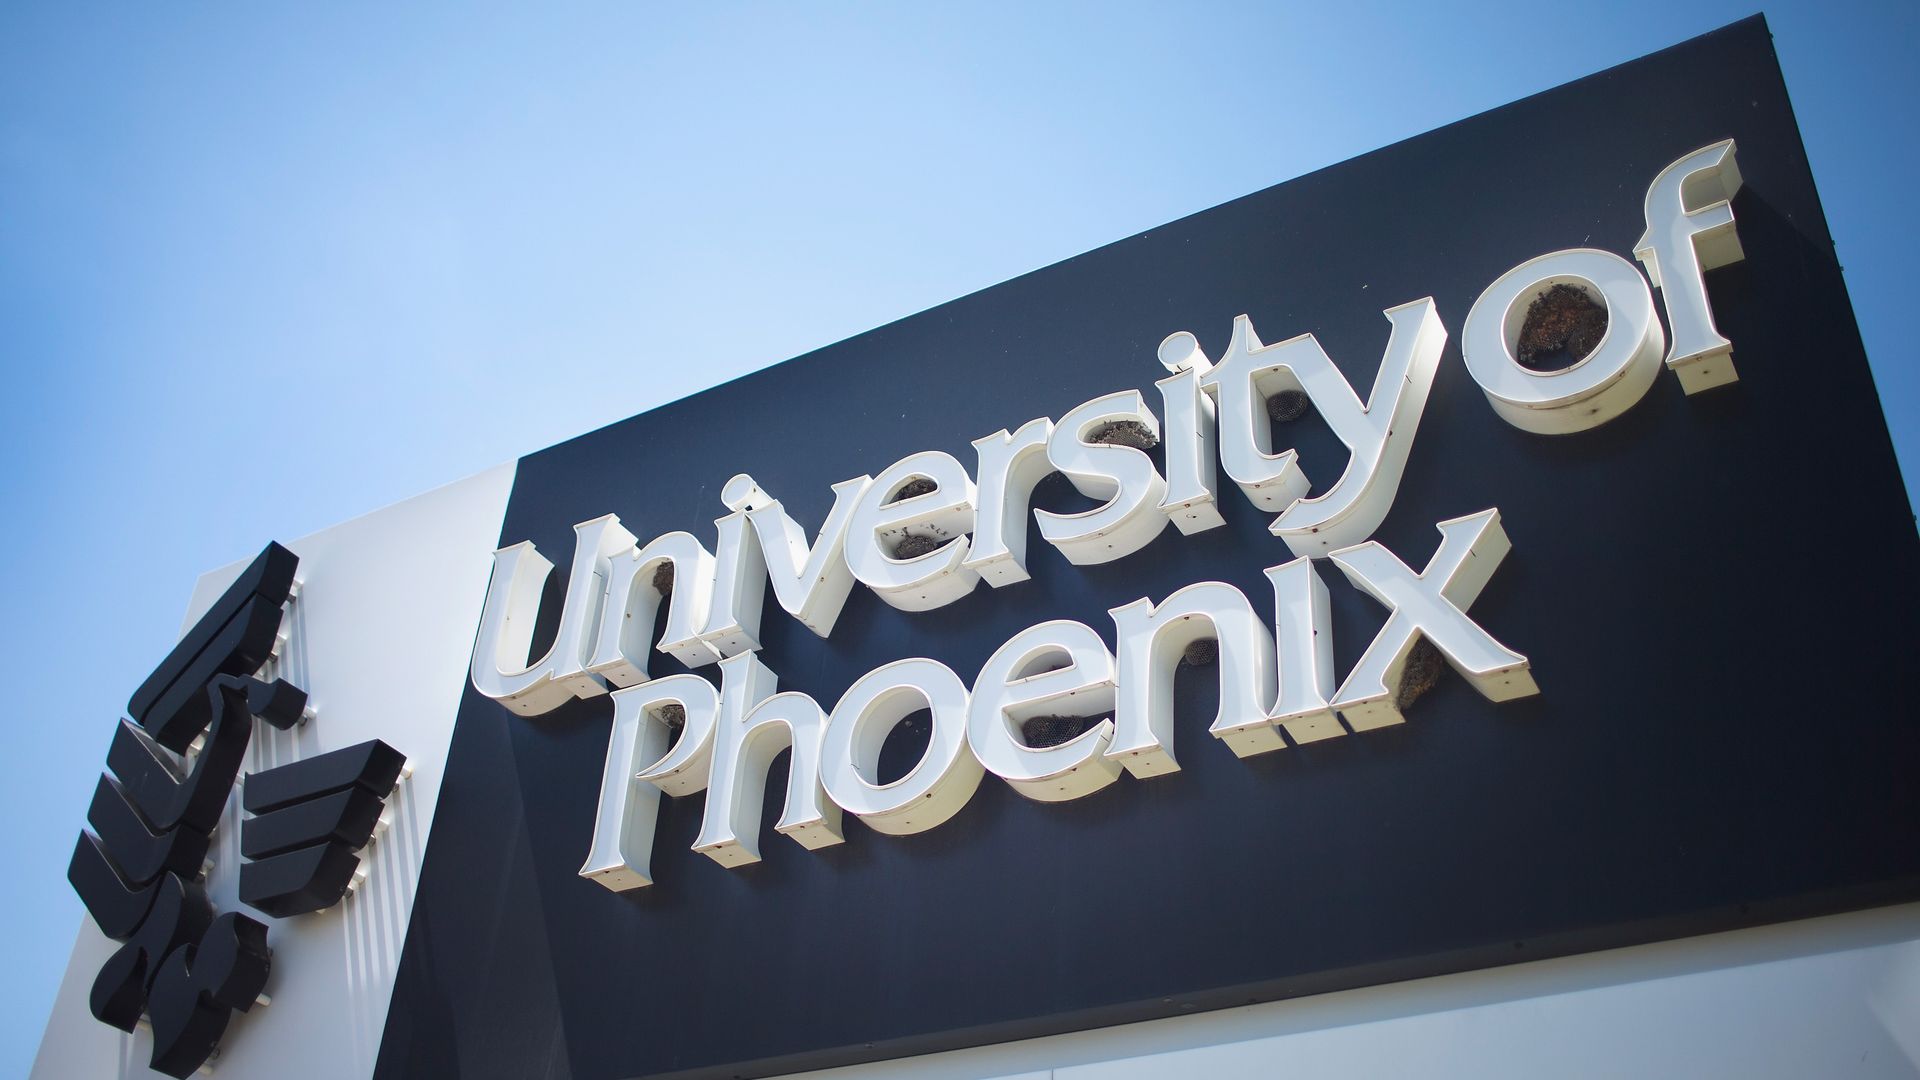 In this image, a campus sign reads "University of Phoenix" 